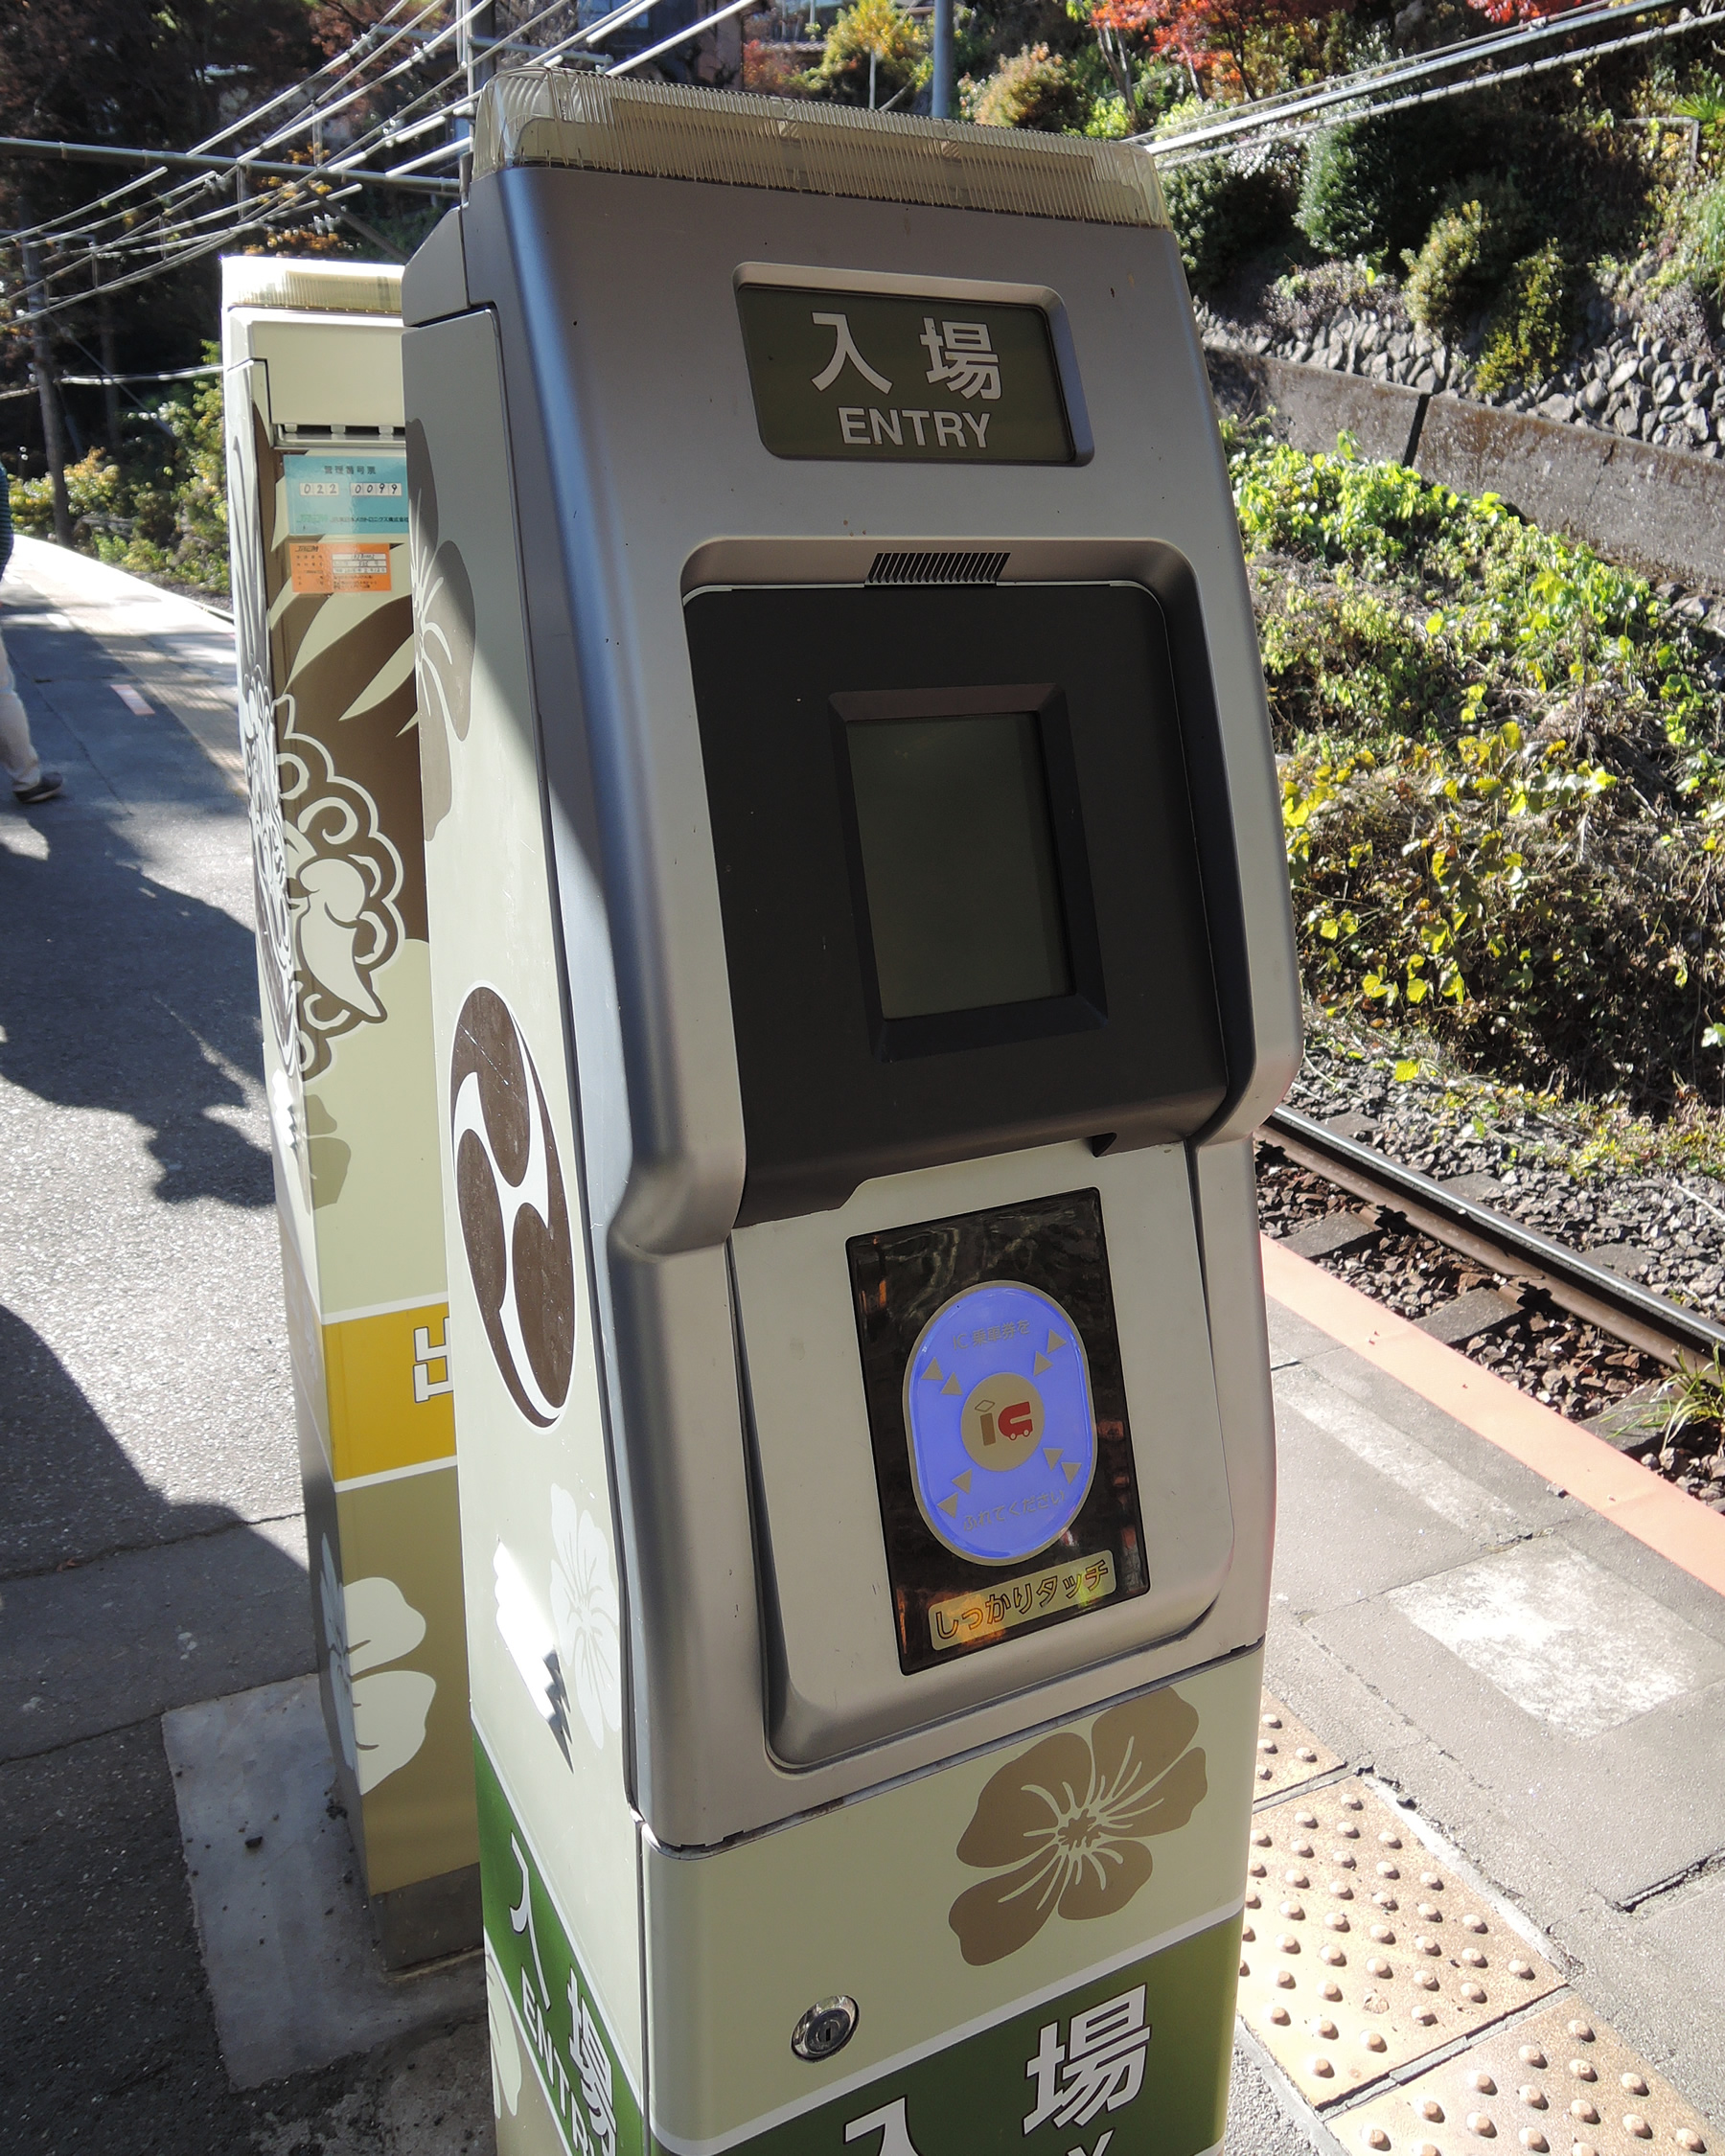 Ticket gate machine at an unmanned station